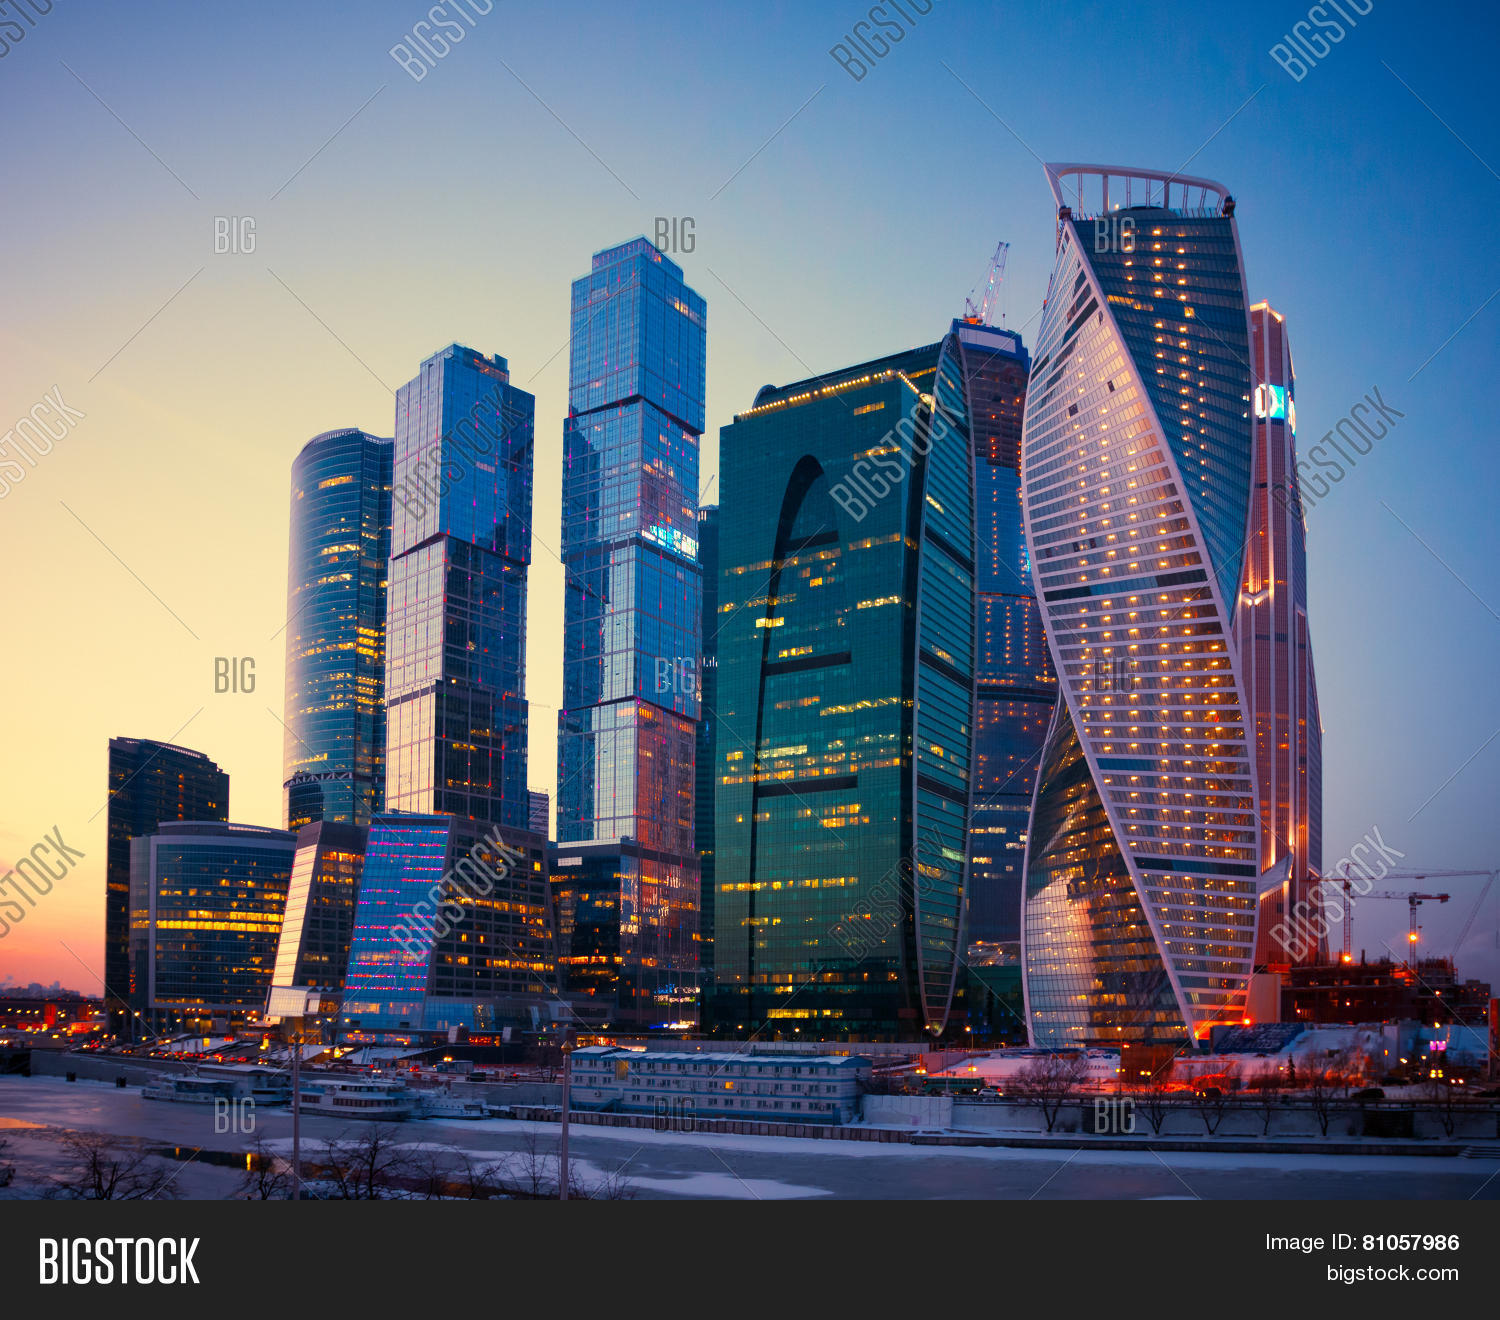 Skyscrapers Buildings Moscow City Image & Photo | Bigstock